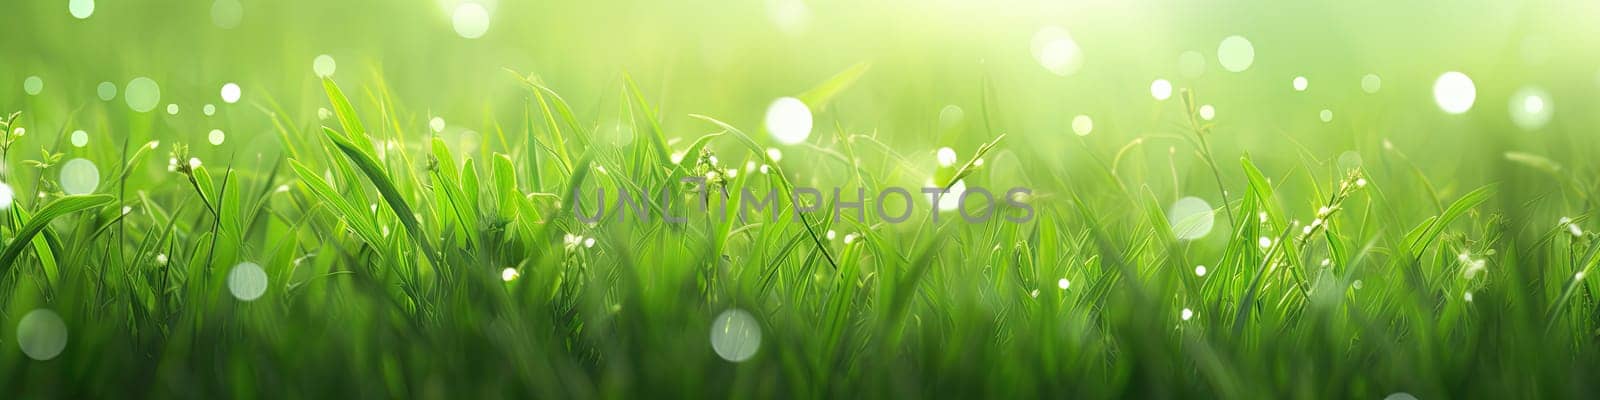 Green grass and the sunlight banner background